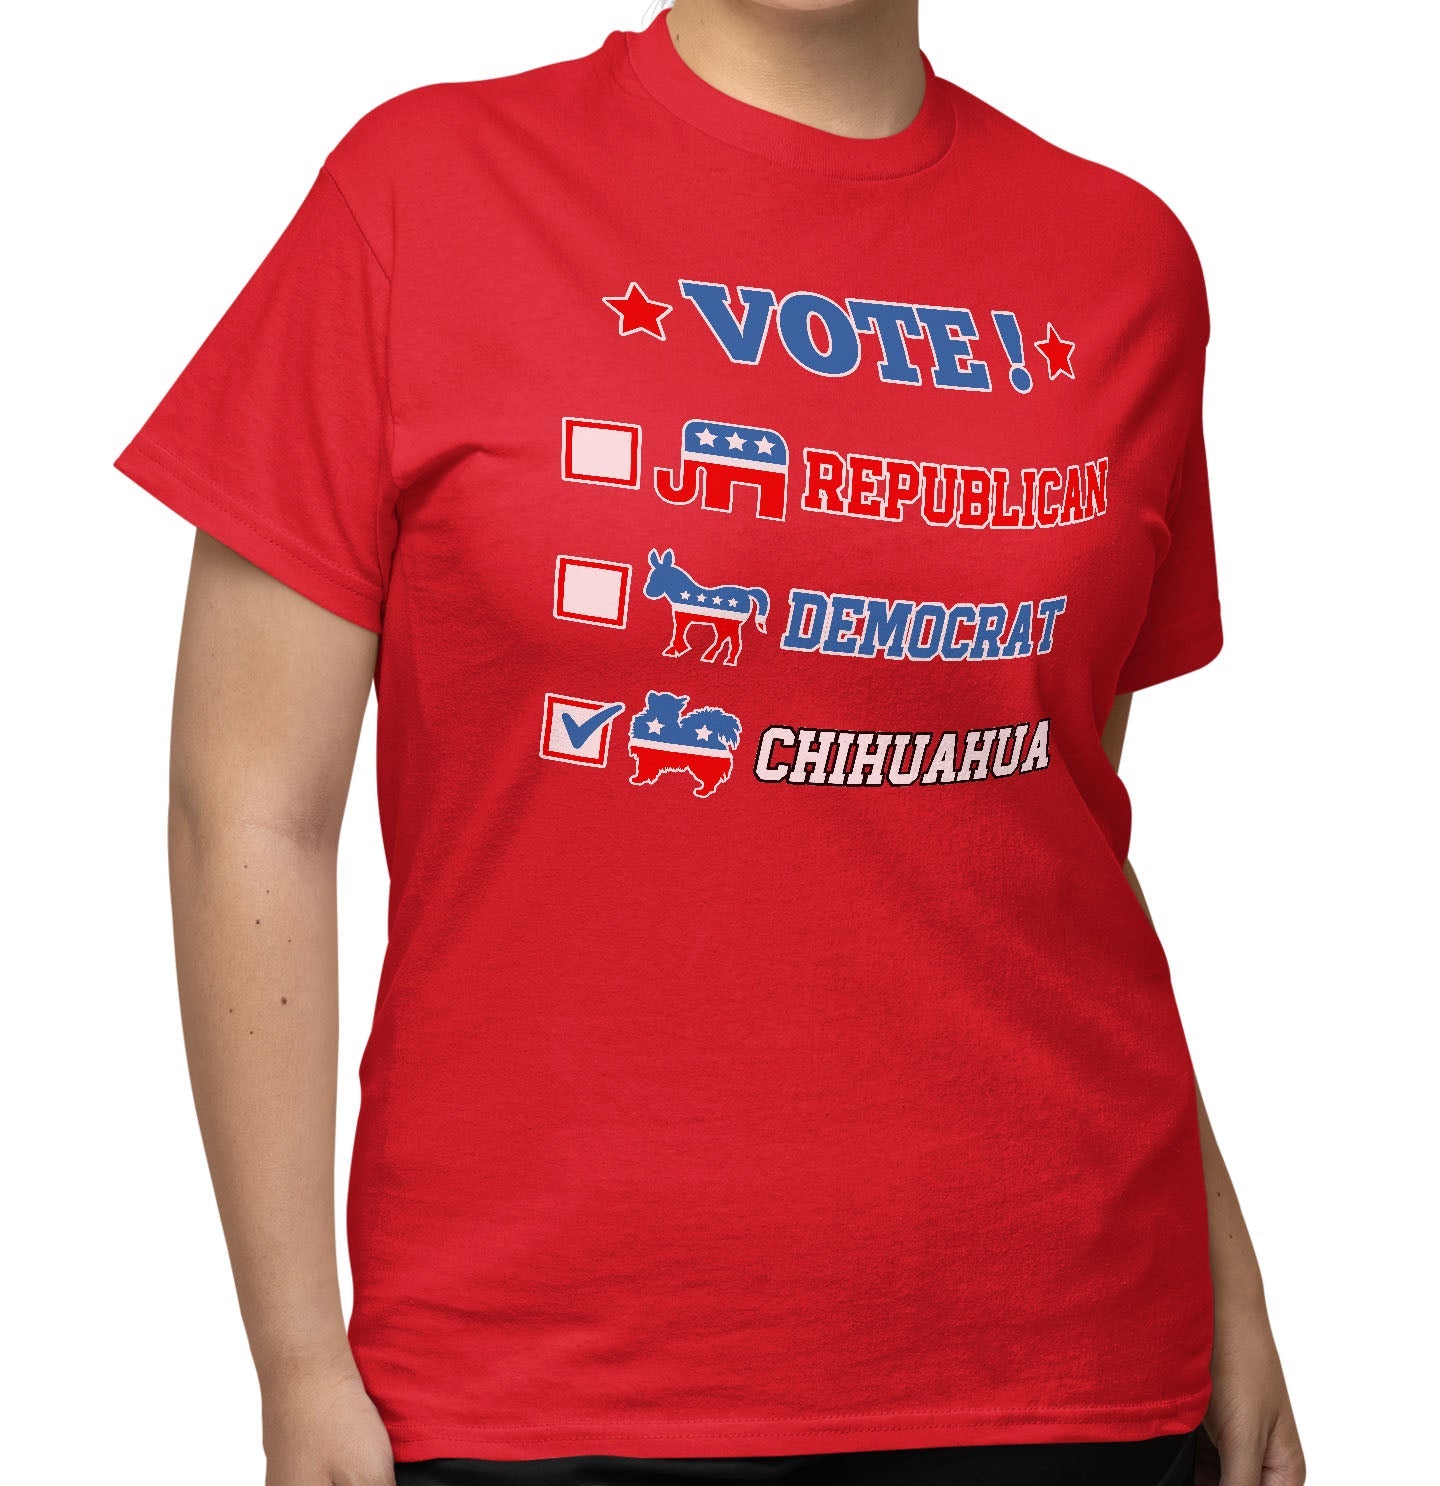 Vote for the Chihuahua (Long-Haired) - Adult Unisex T-Shirt